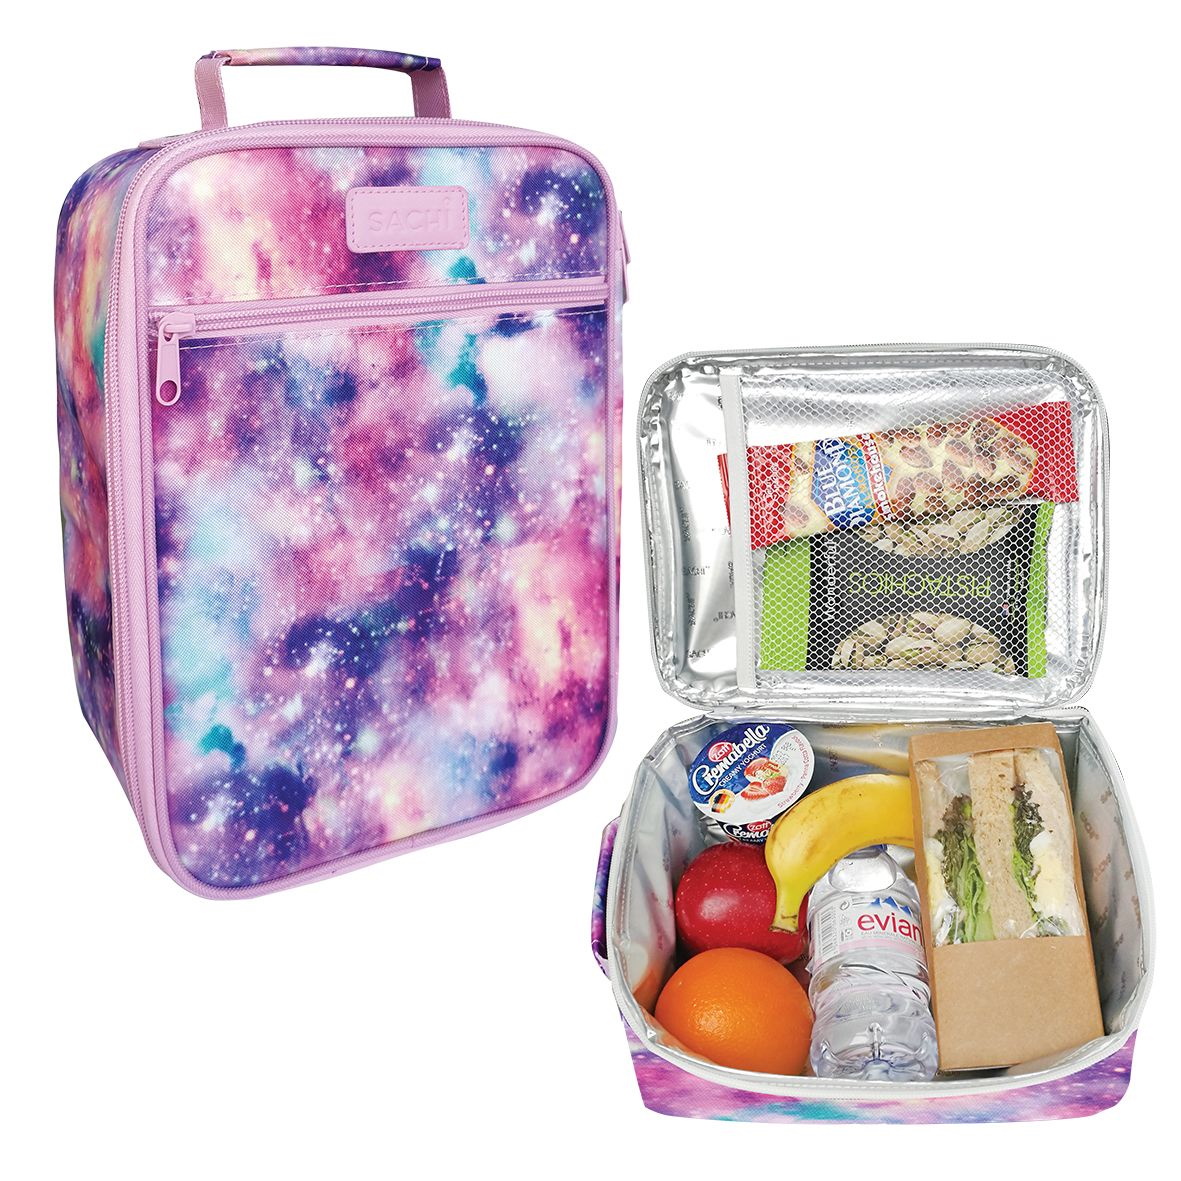 Sachi Style 225 Insulated Junior Lunch Tote - Galaxy